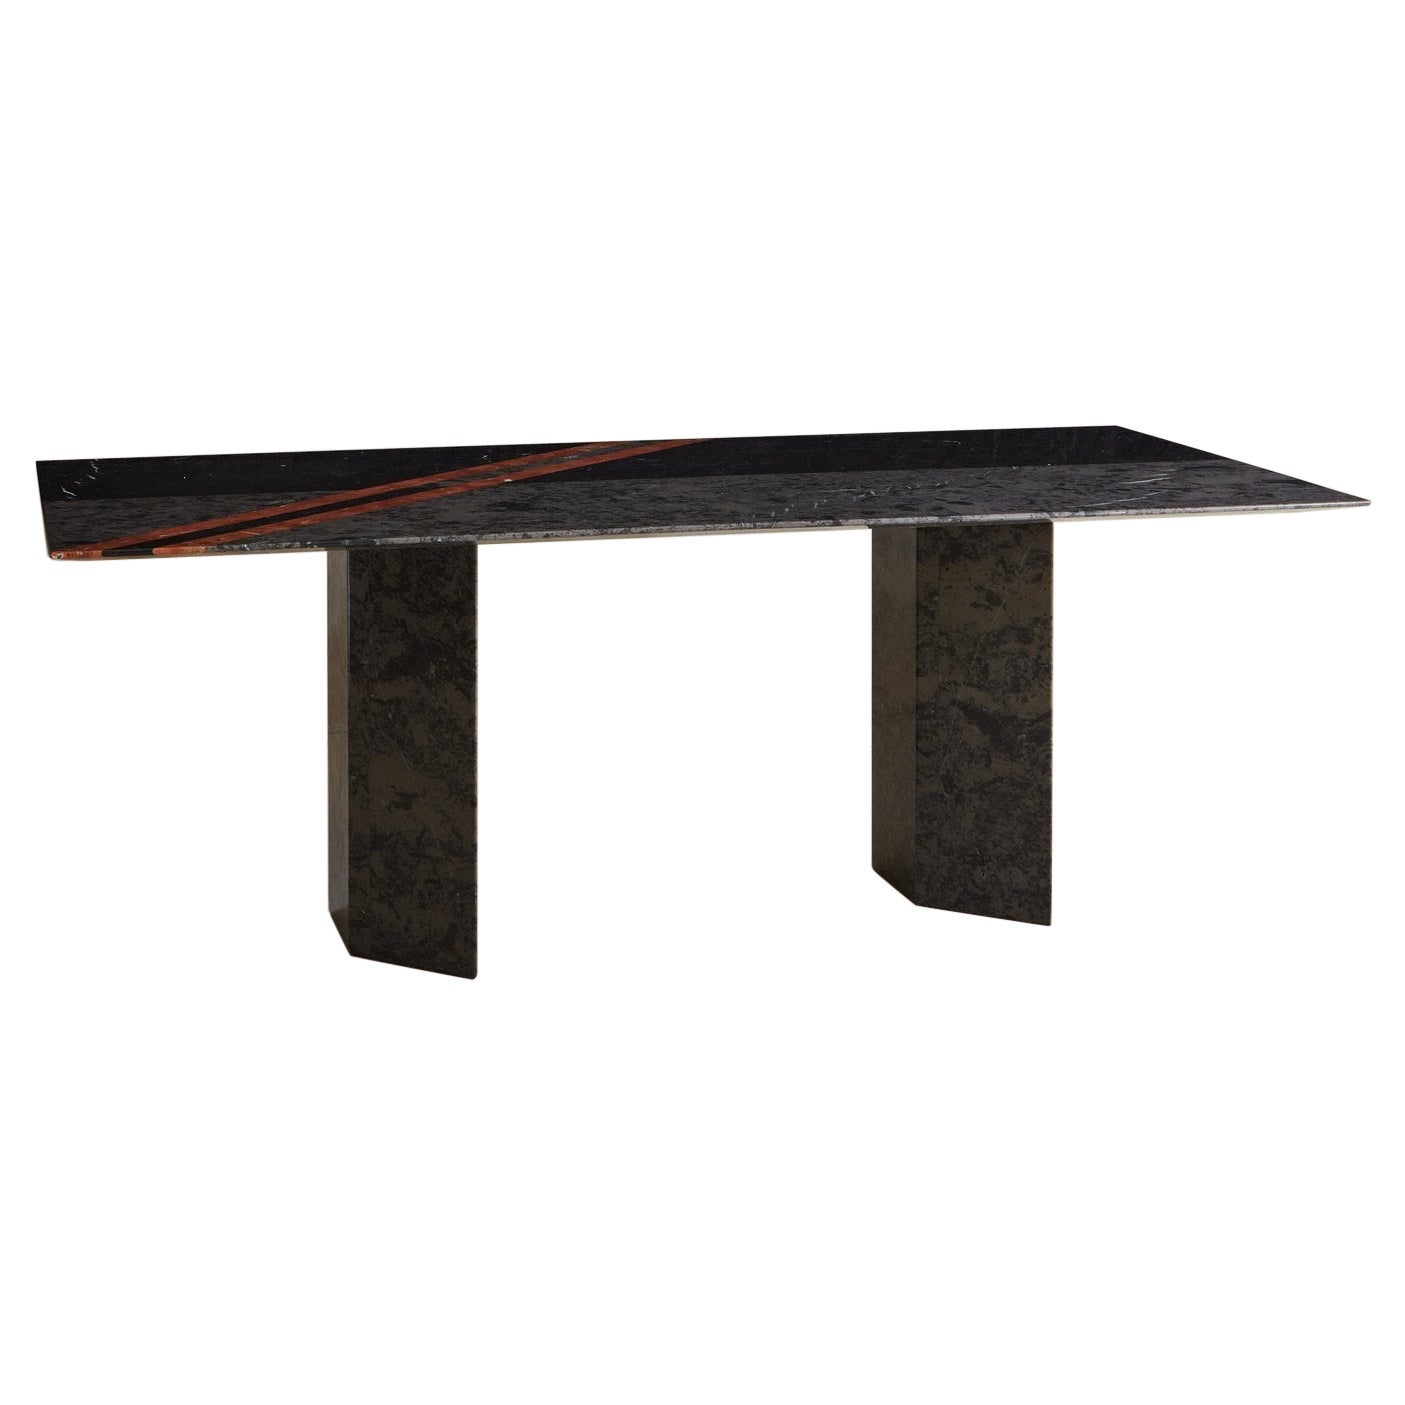 Postmodern Roche-Bobois Marble Dining Table, 1980s For Sale